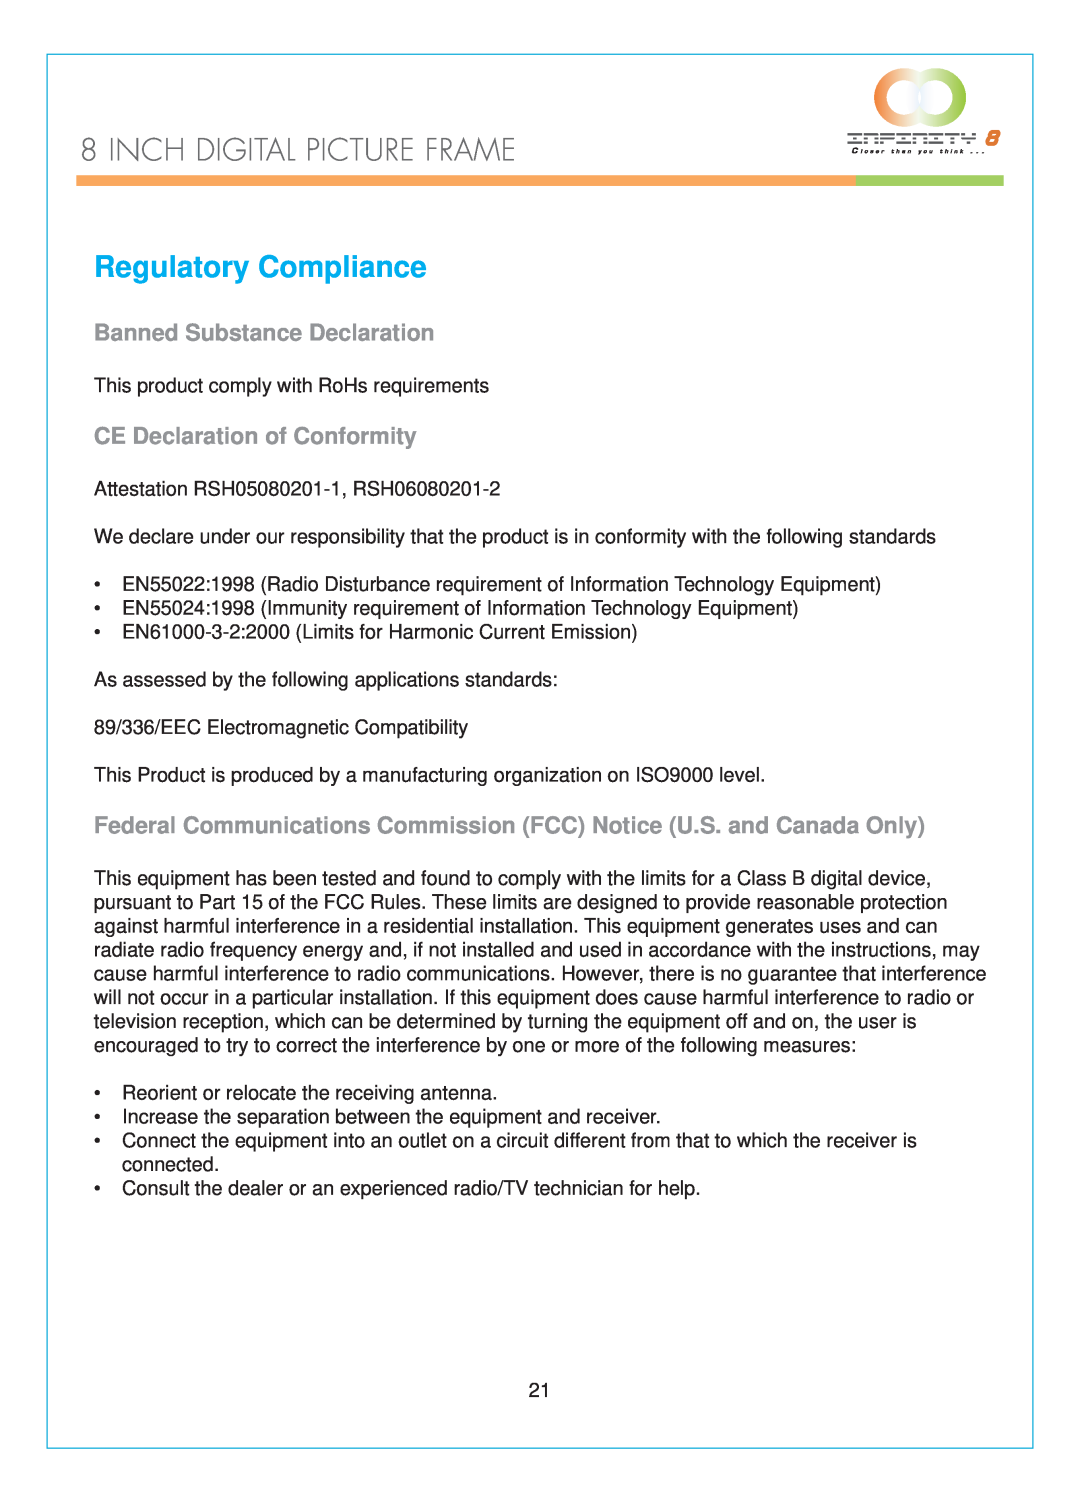 Infinity DPF-8000 user manual Regulatory Compliance, Banned Substance Declaration, CE Declaration of Conformity 